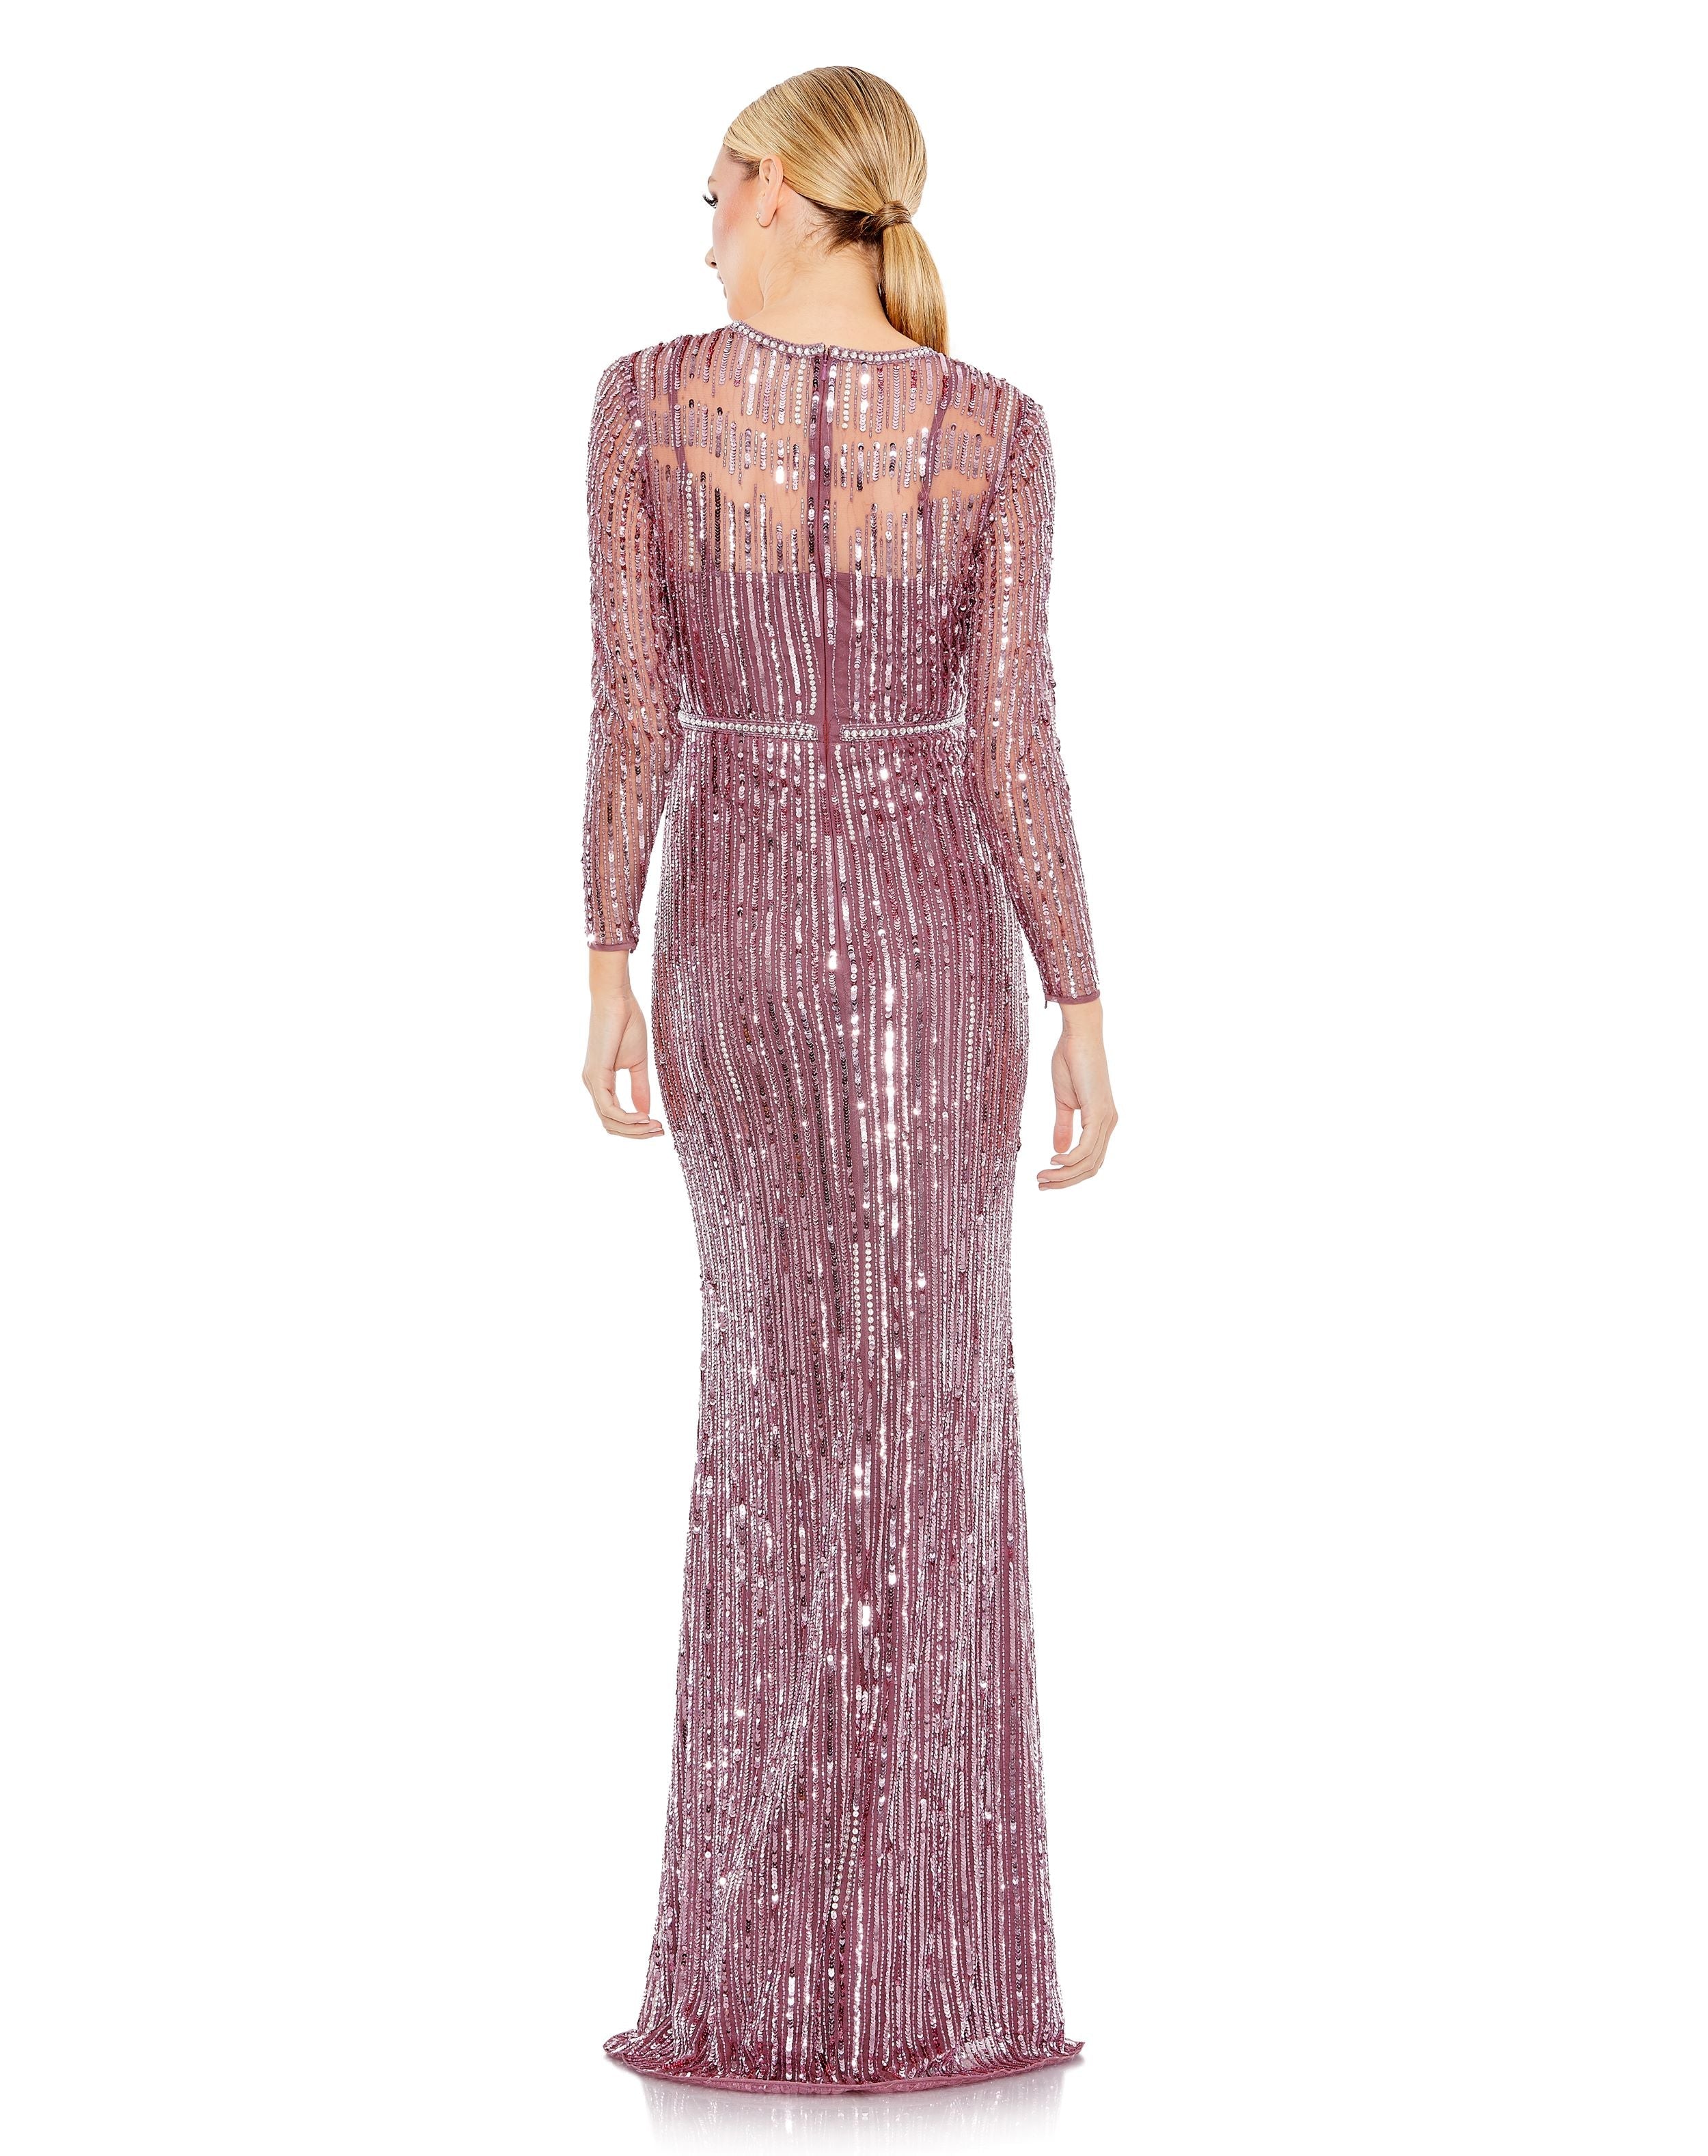 Sequined Illusion High Neck Long Sleeve Trumpet Gown